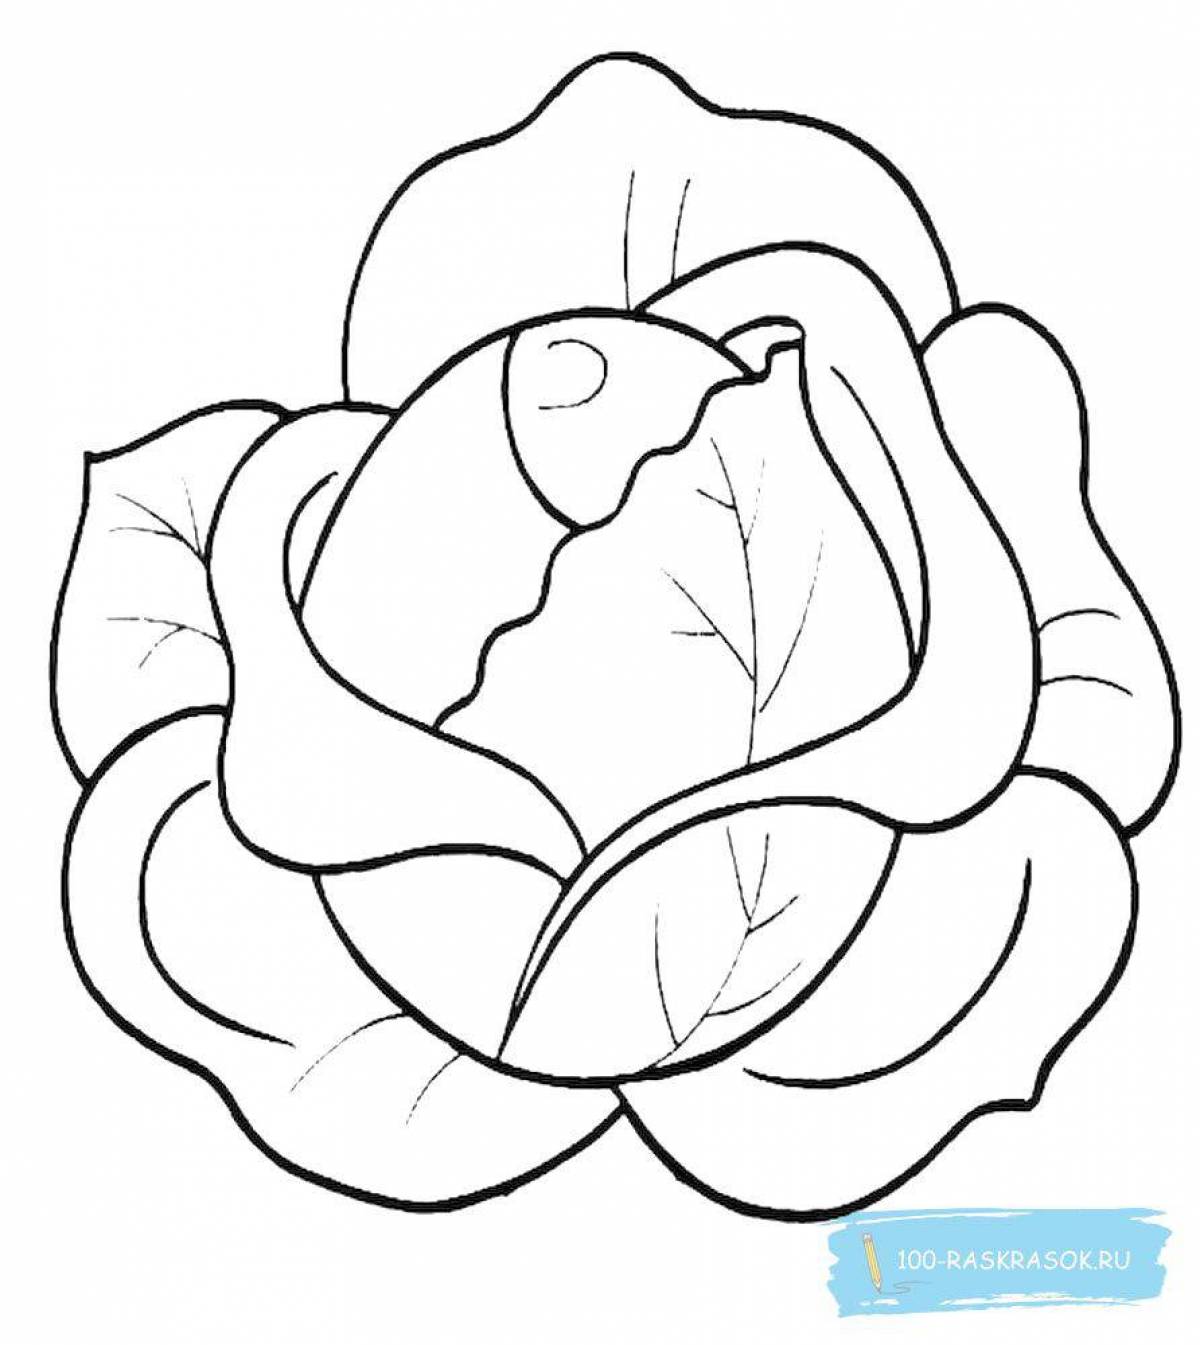 Children's colorful cabbage coloring book